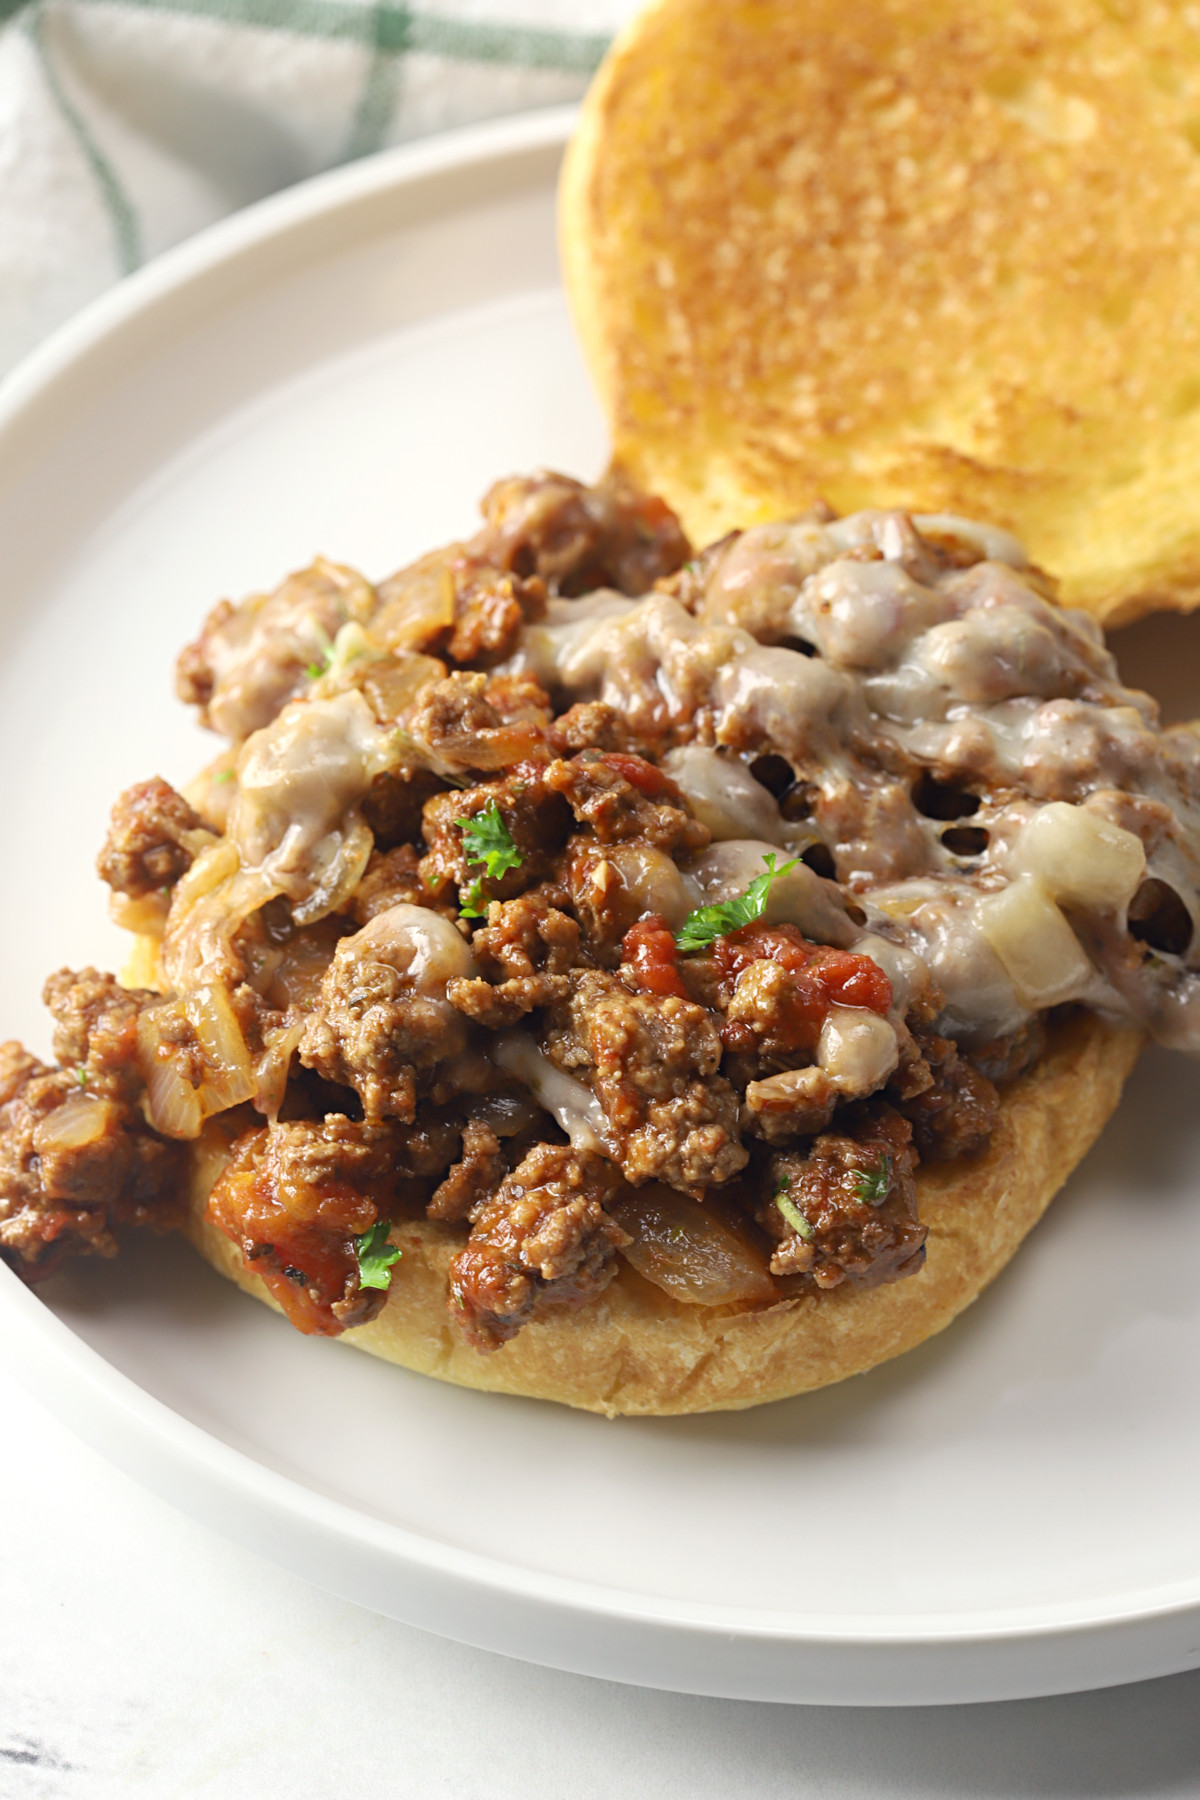 Sloppy joe topped with melted cheese.